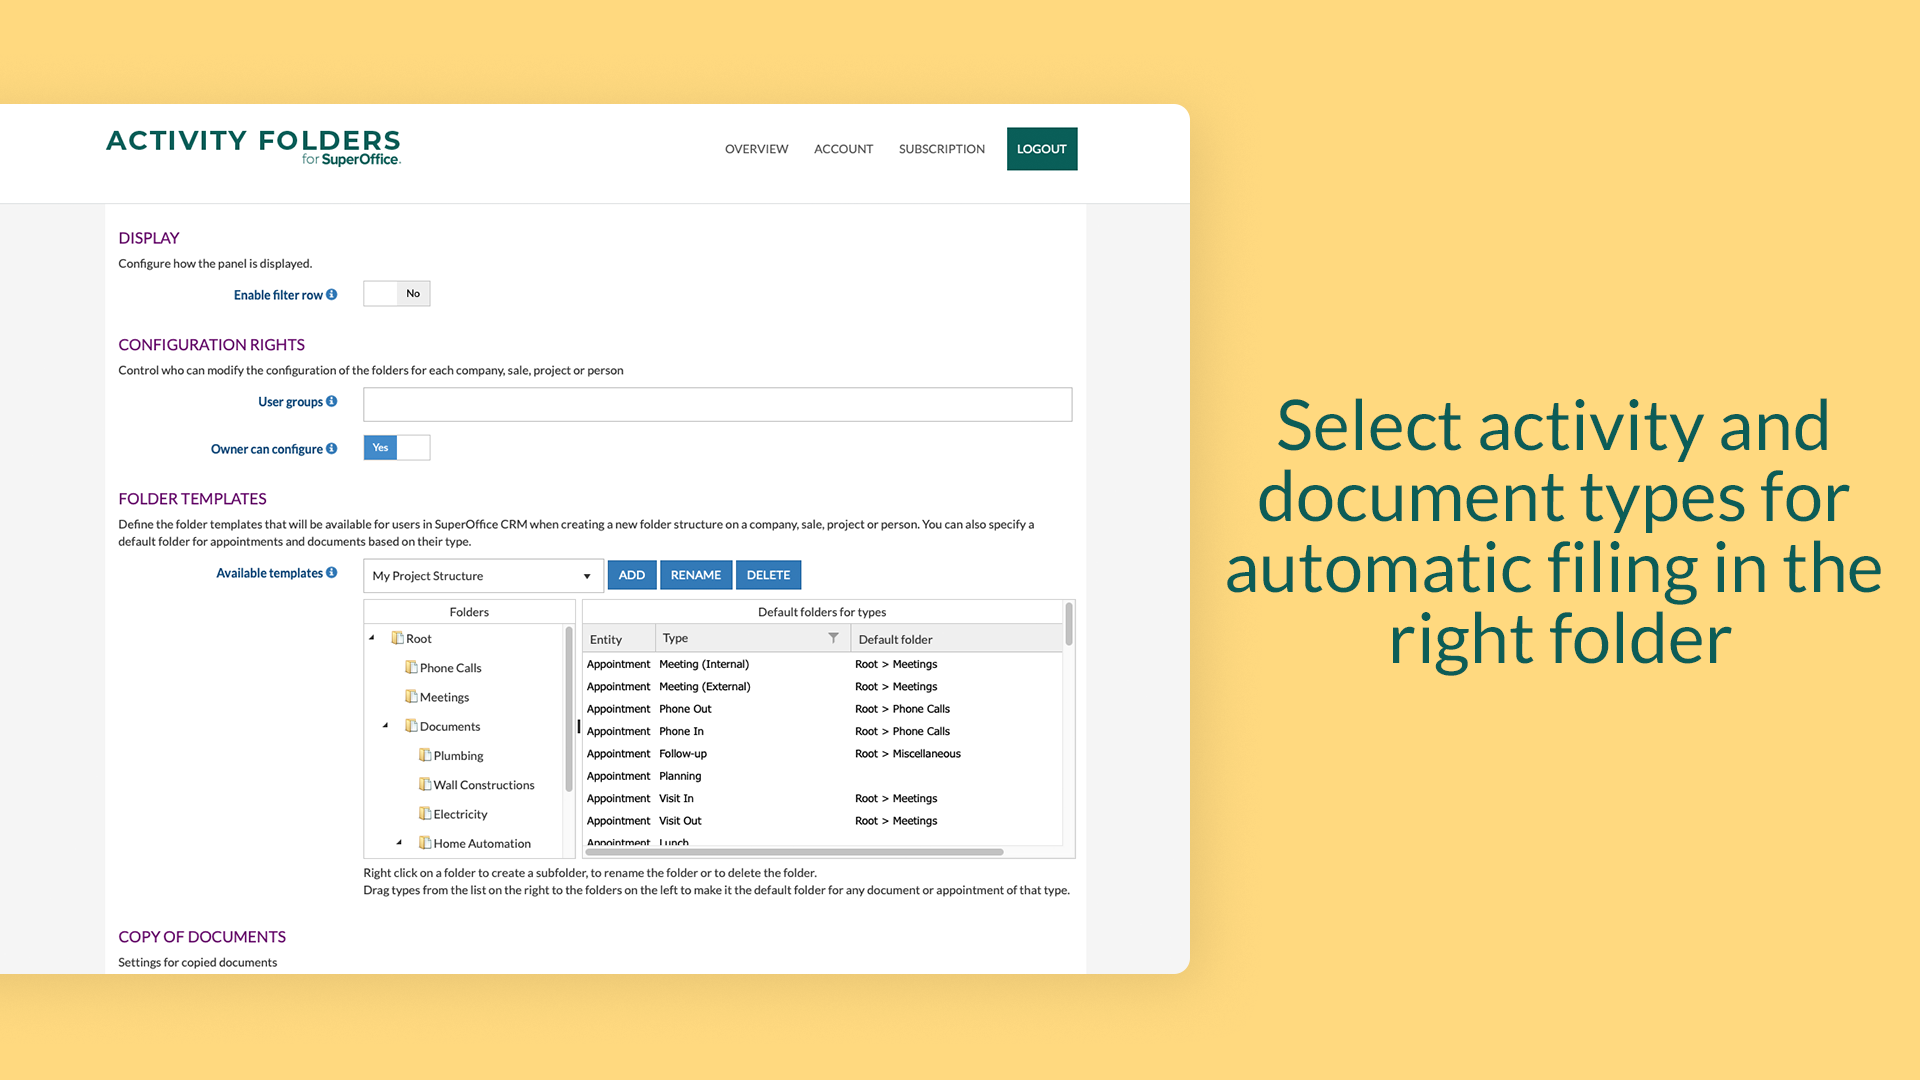 Select activity and document types for automatic filing in the right folder